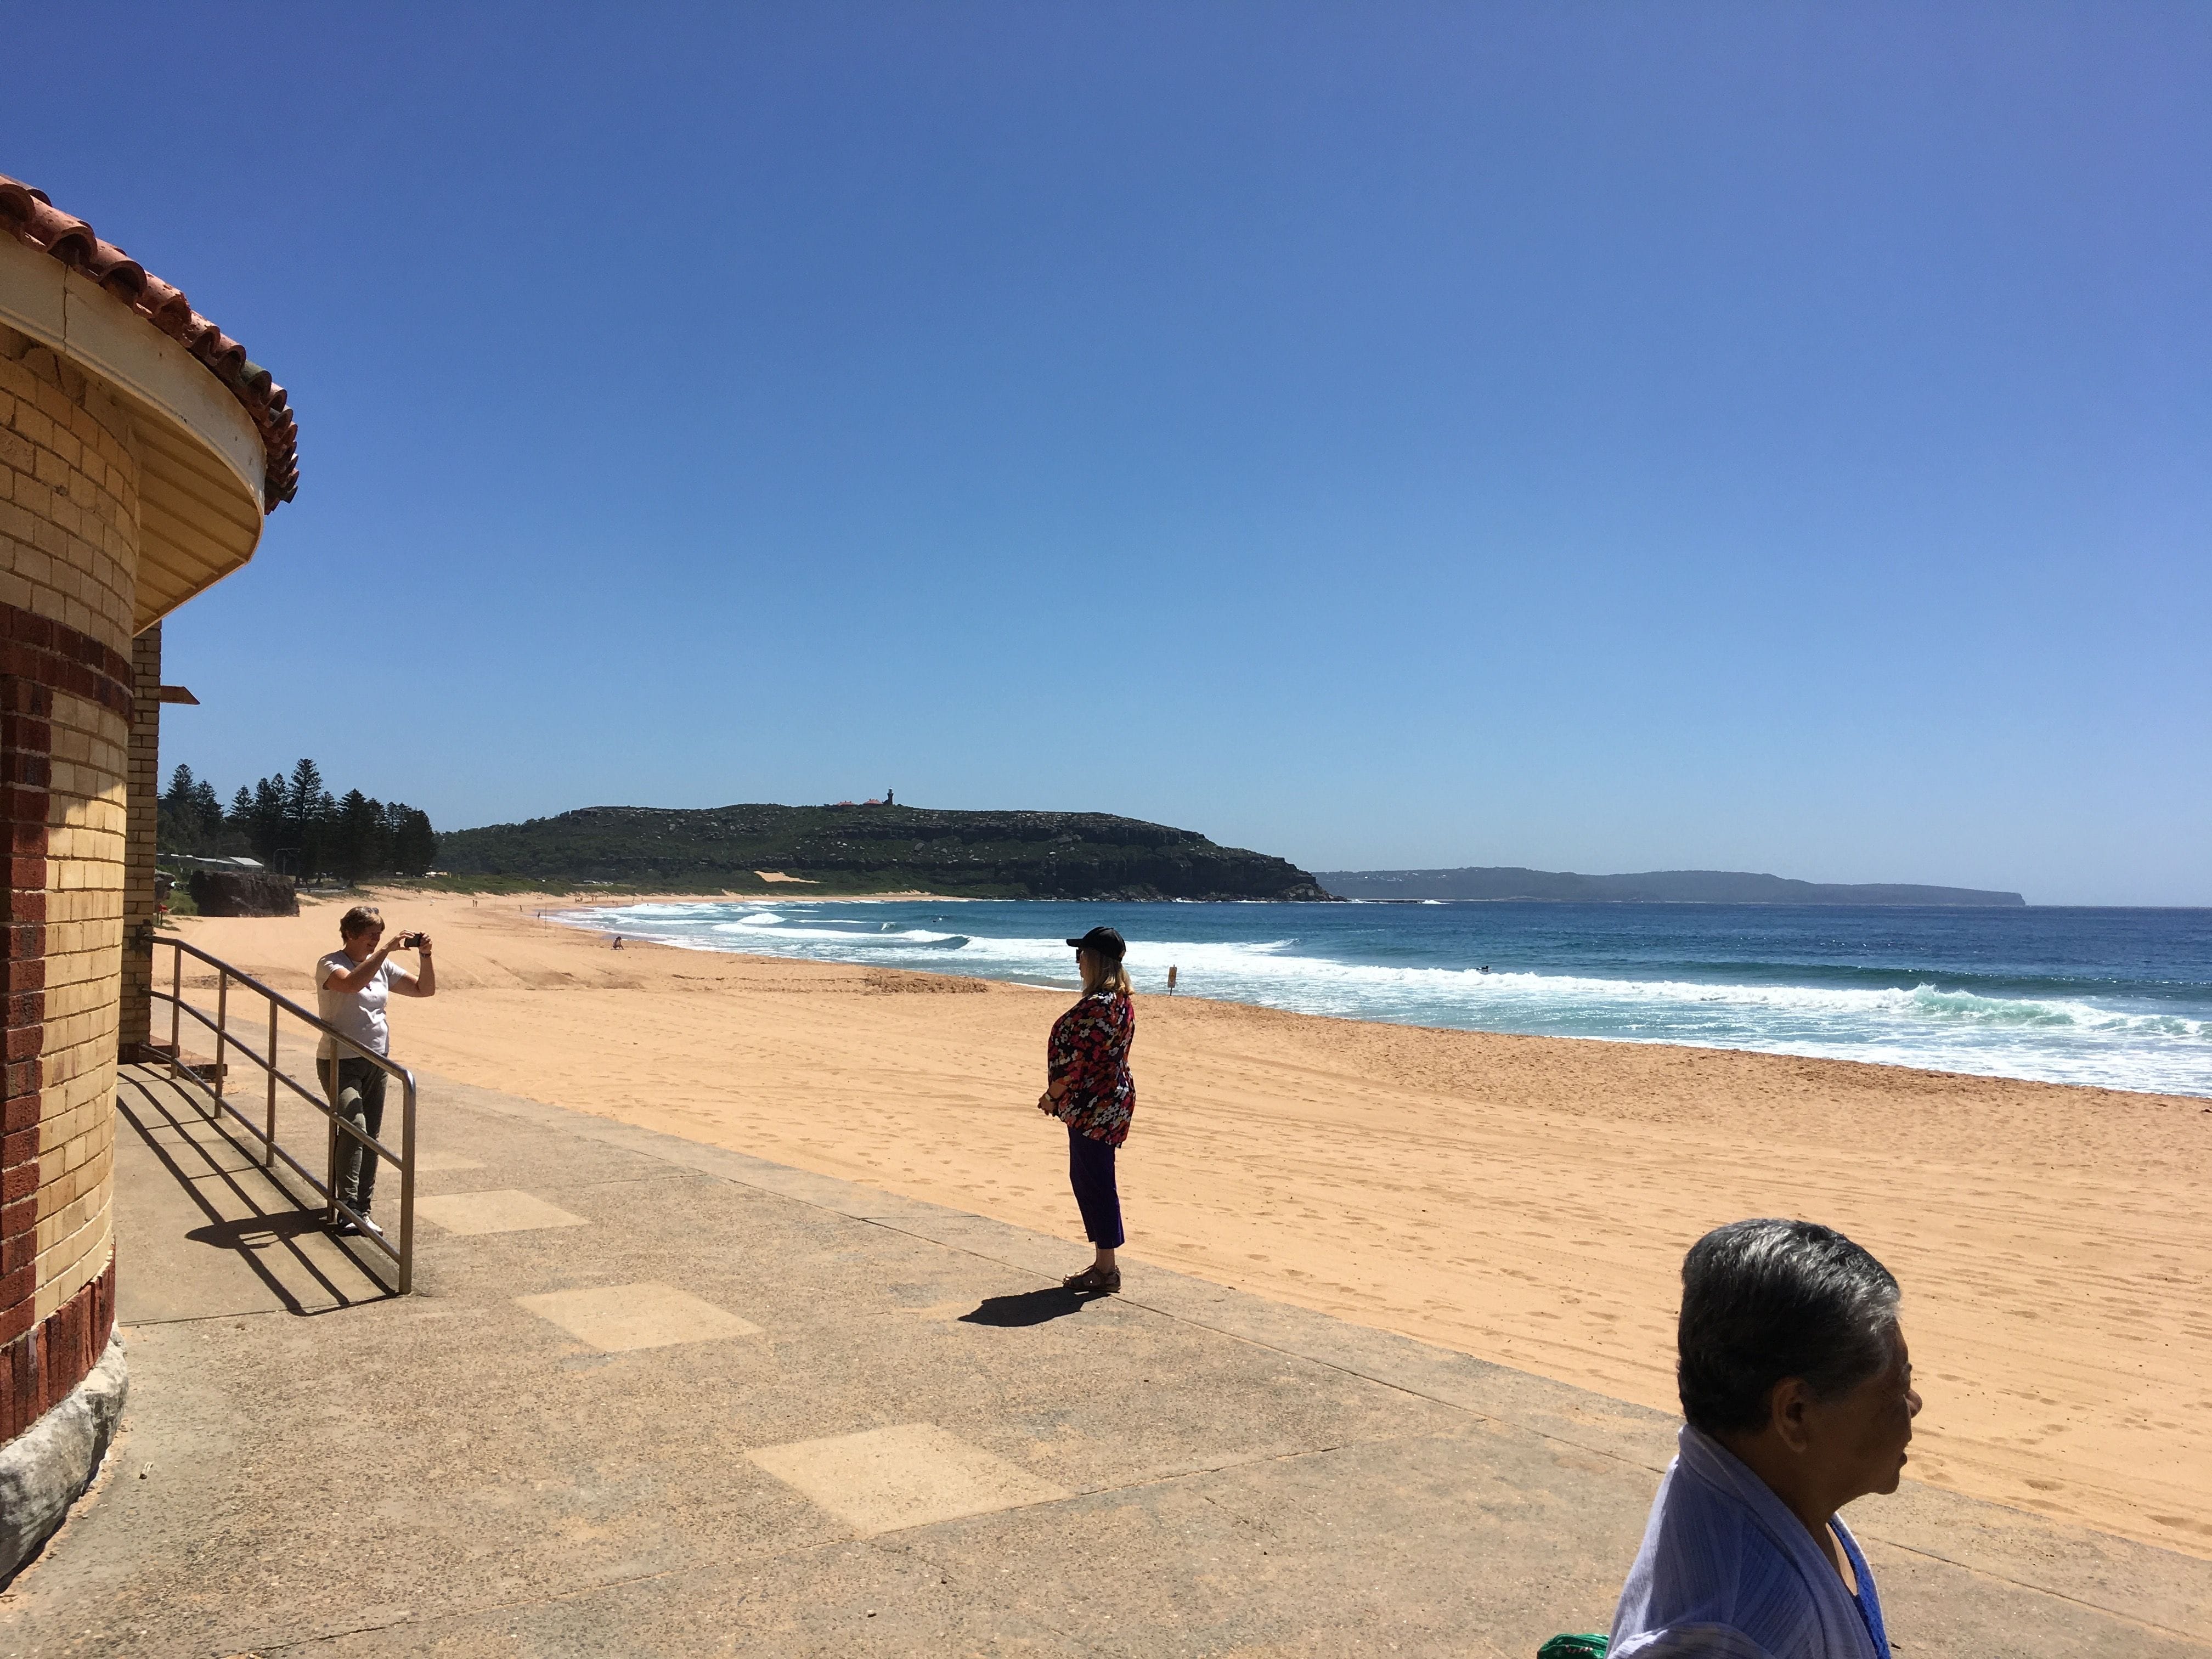 Northern Beaches Public Day Tour febuary 2019 Image -5c64967529aa3